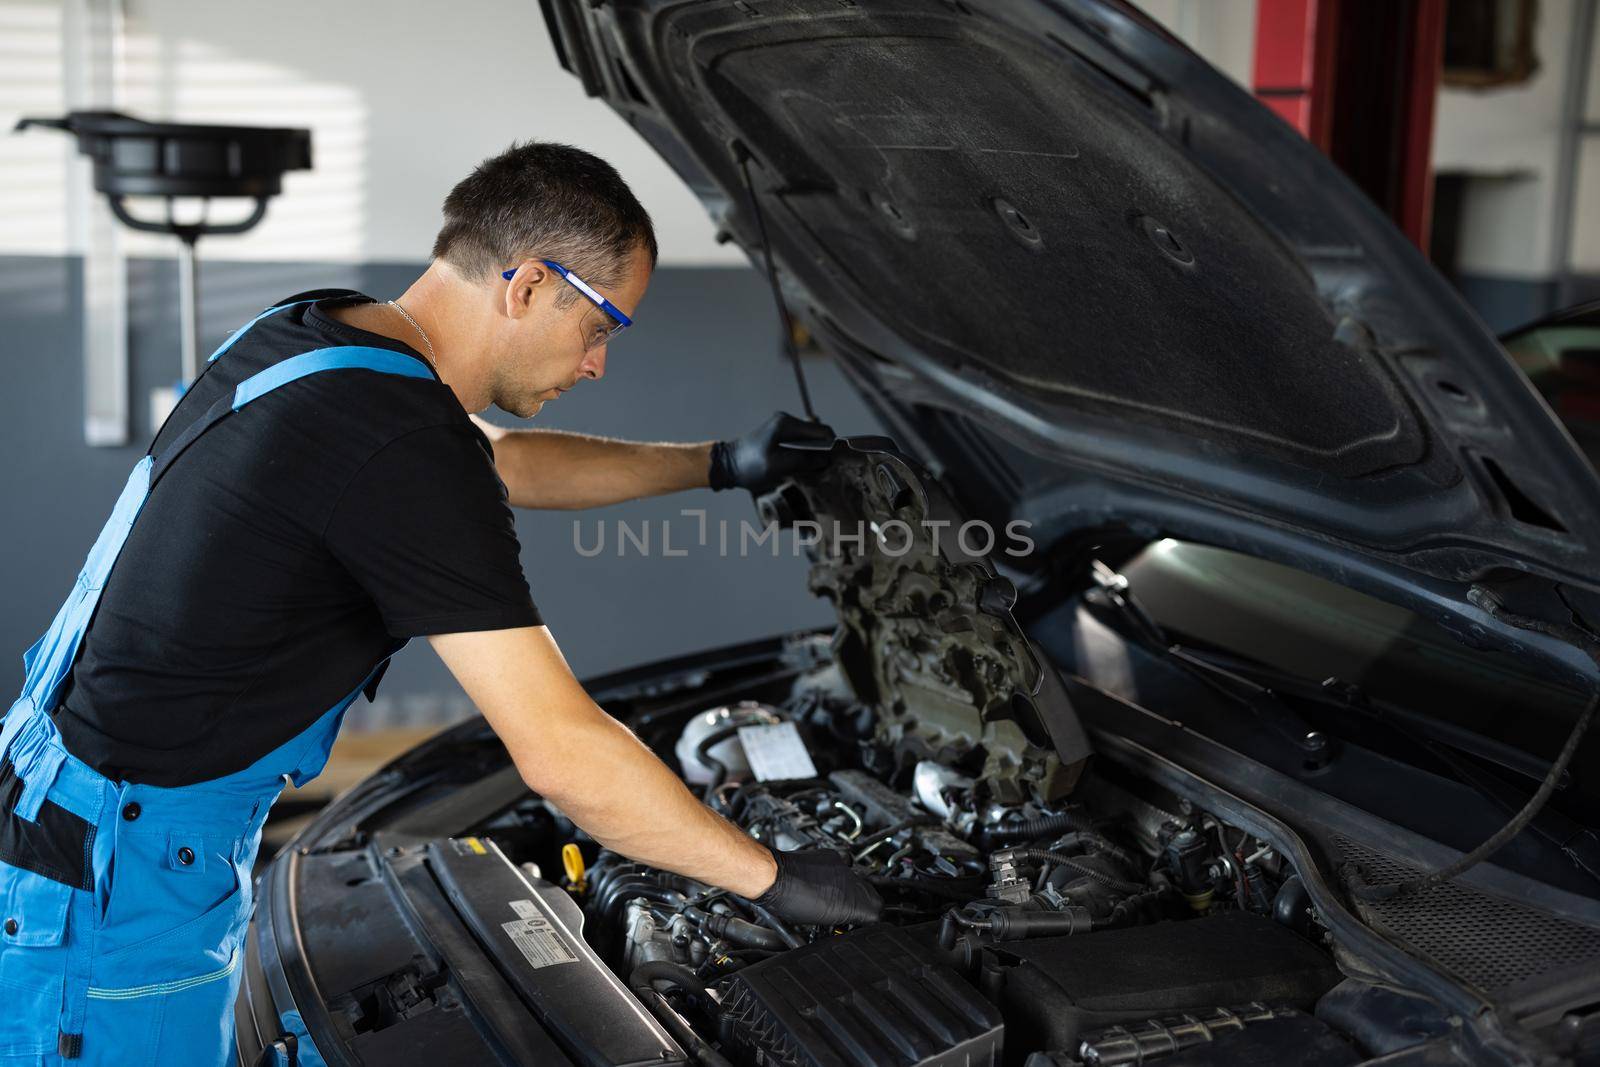 Car mechanic noting repair parts during open car hood engine repair at garage. Mechanic man open a car hood and check up the engine. Overheating of a car engine. Motor with open hood.